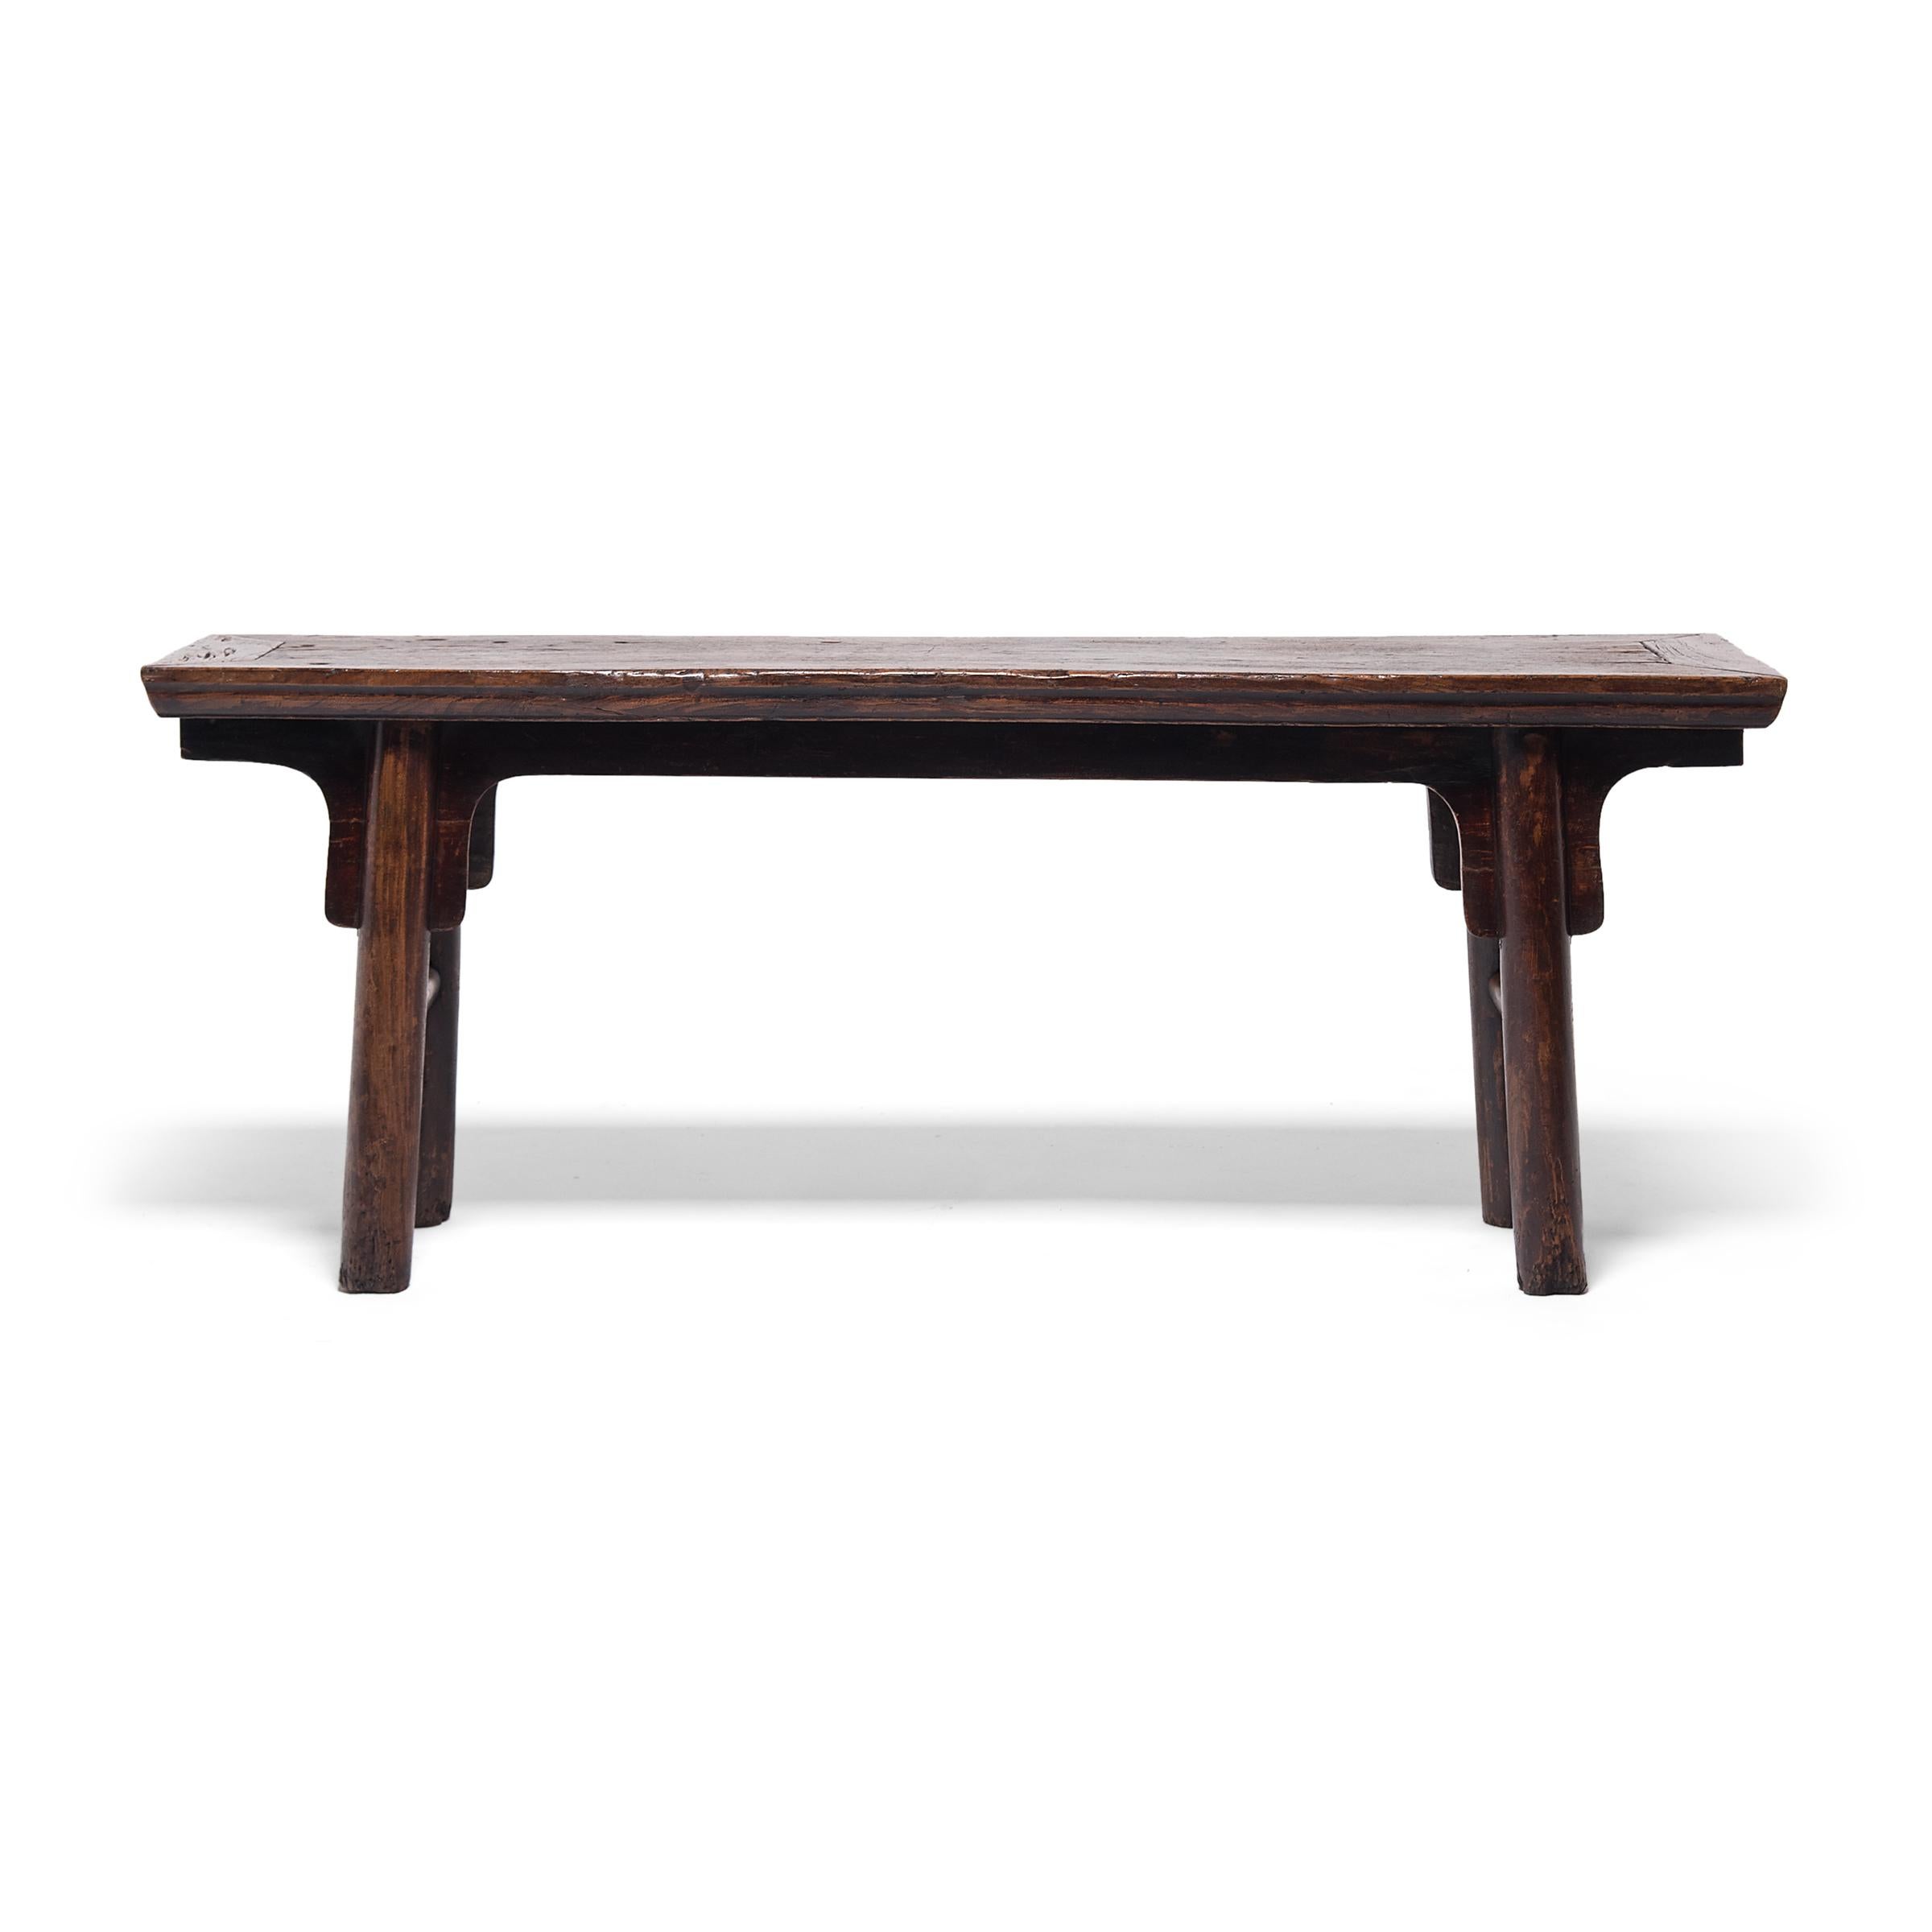 This elegant recessed-leg table dates to the early 19th century and was designed to be used as a surface for serving food or wine. The narrow table is designed in a classical Ming style, with a floating panel top, simple spandrels, and round legs